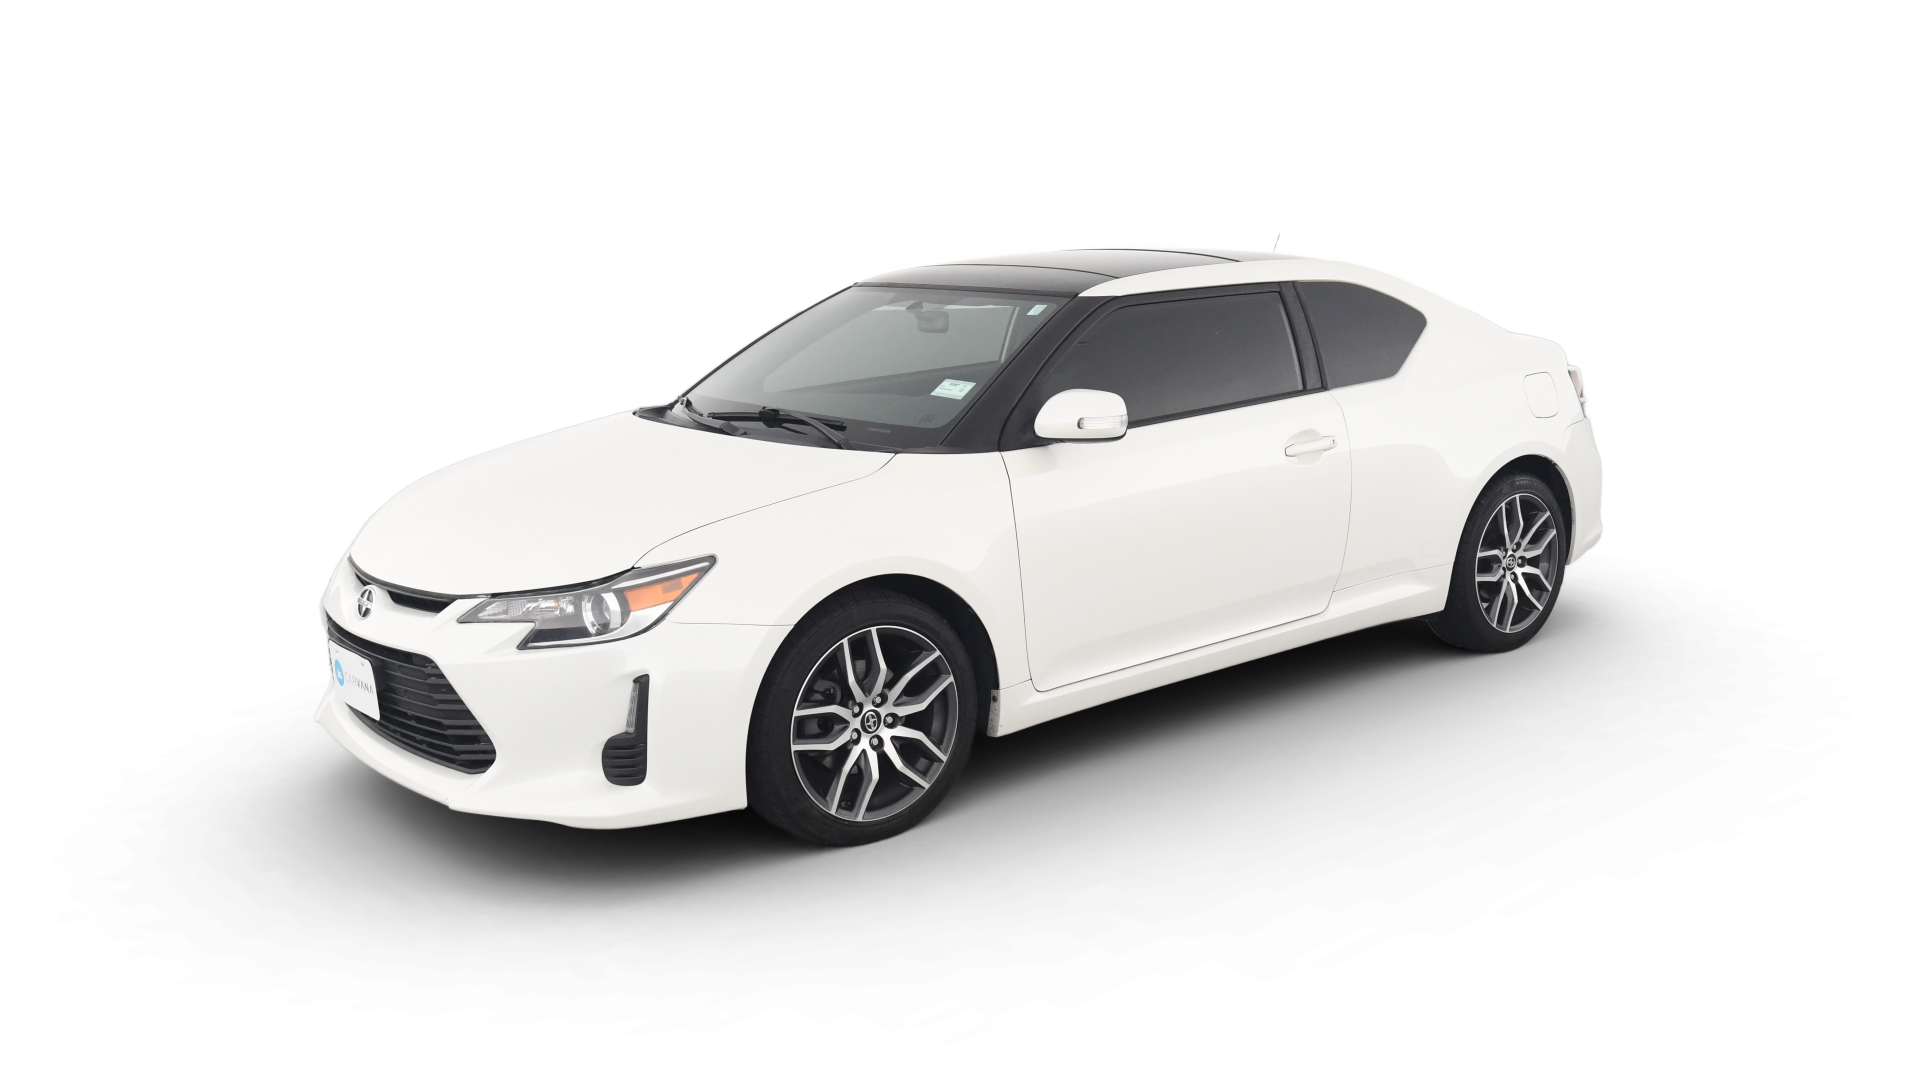 Used Scion For Sale Online | Carvana